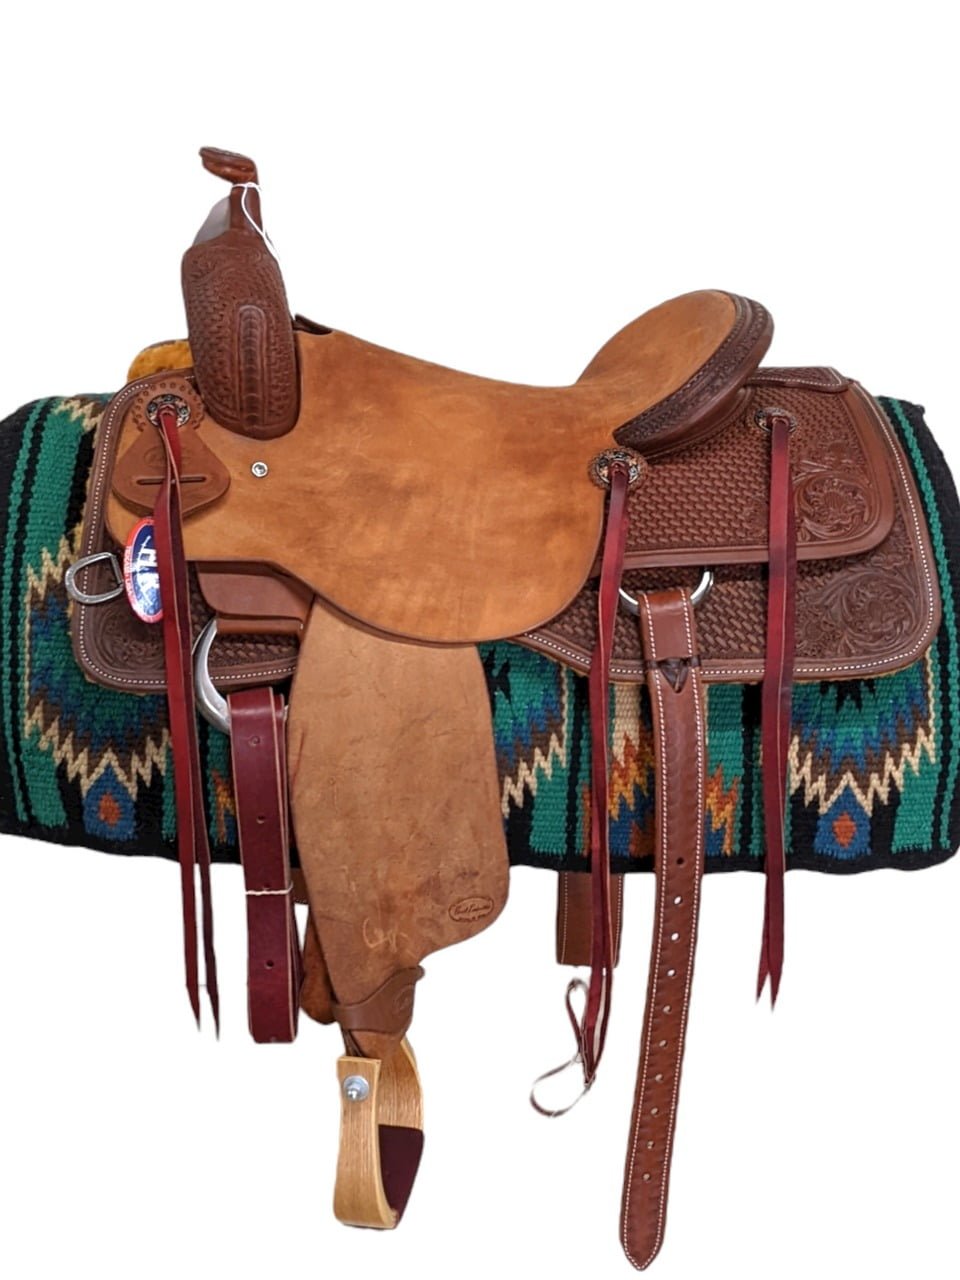 HR Saddlery's signature series ranch cutting saddle is exquisitely constructed. This saddle comes with a lifetime tree warranty and a real wool fleece bottom upgrade. The rough-out seat, seat jockey, and fenders keep the rider firmly in place. To keep the rider's gear close at hand, saddle strings are included. The swells, skirts, and cantle of the saddle are accented with a basket stamp and floral tooling. Weight: Approx. 40 lbs Gullet: 7" mid-concho to mid concho Finished Seat Size: 16" Skirt Length: 27" Tree Size: 16.5"